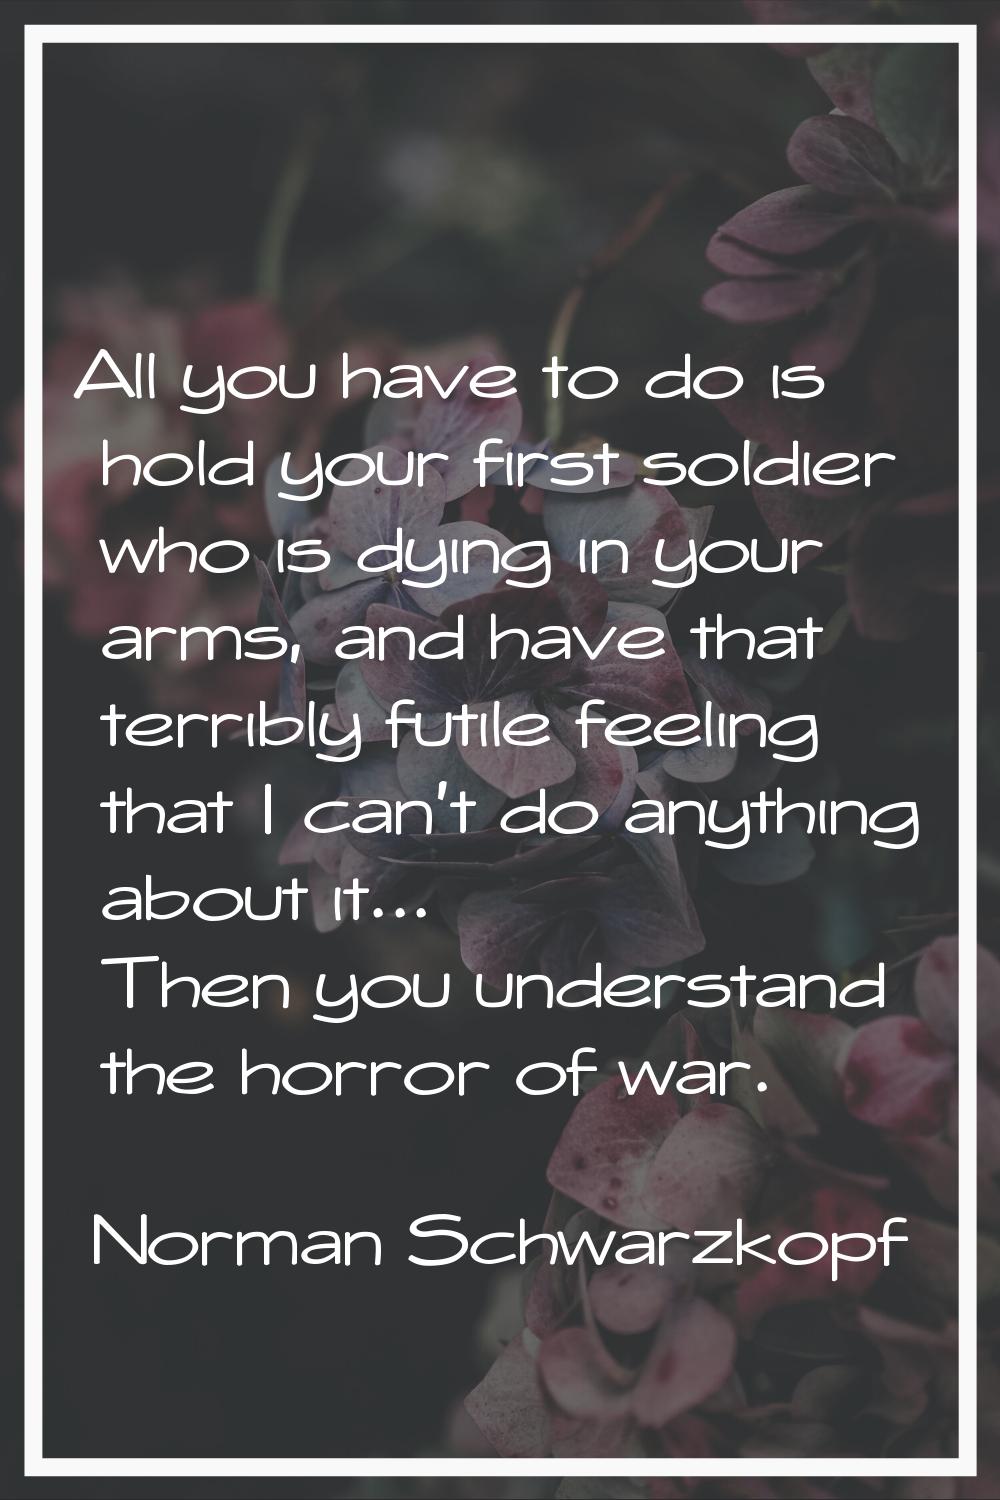 All you have to do is hold your first soldier who is dying in your arms, and have that terribly fut